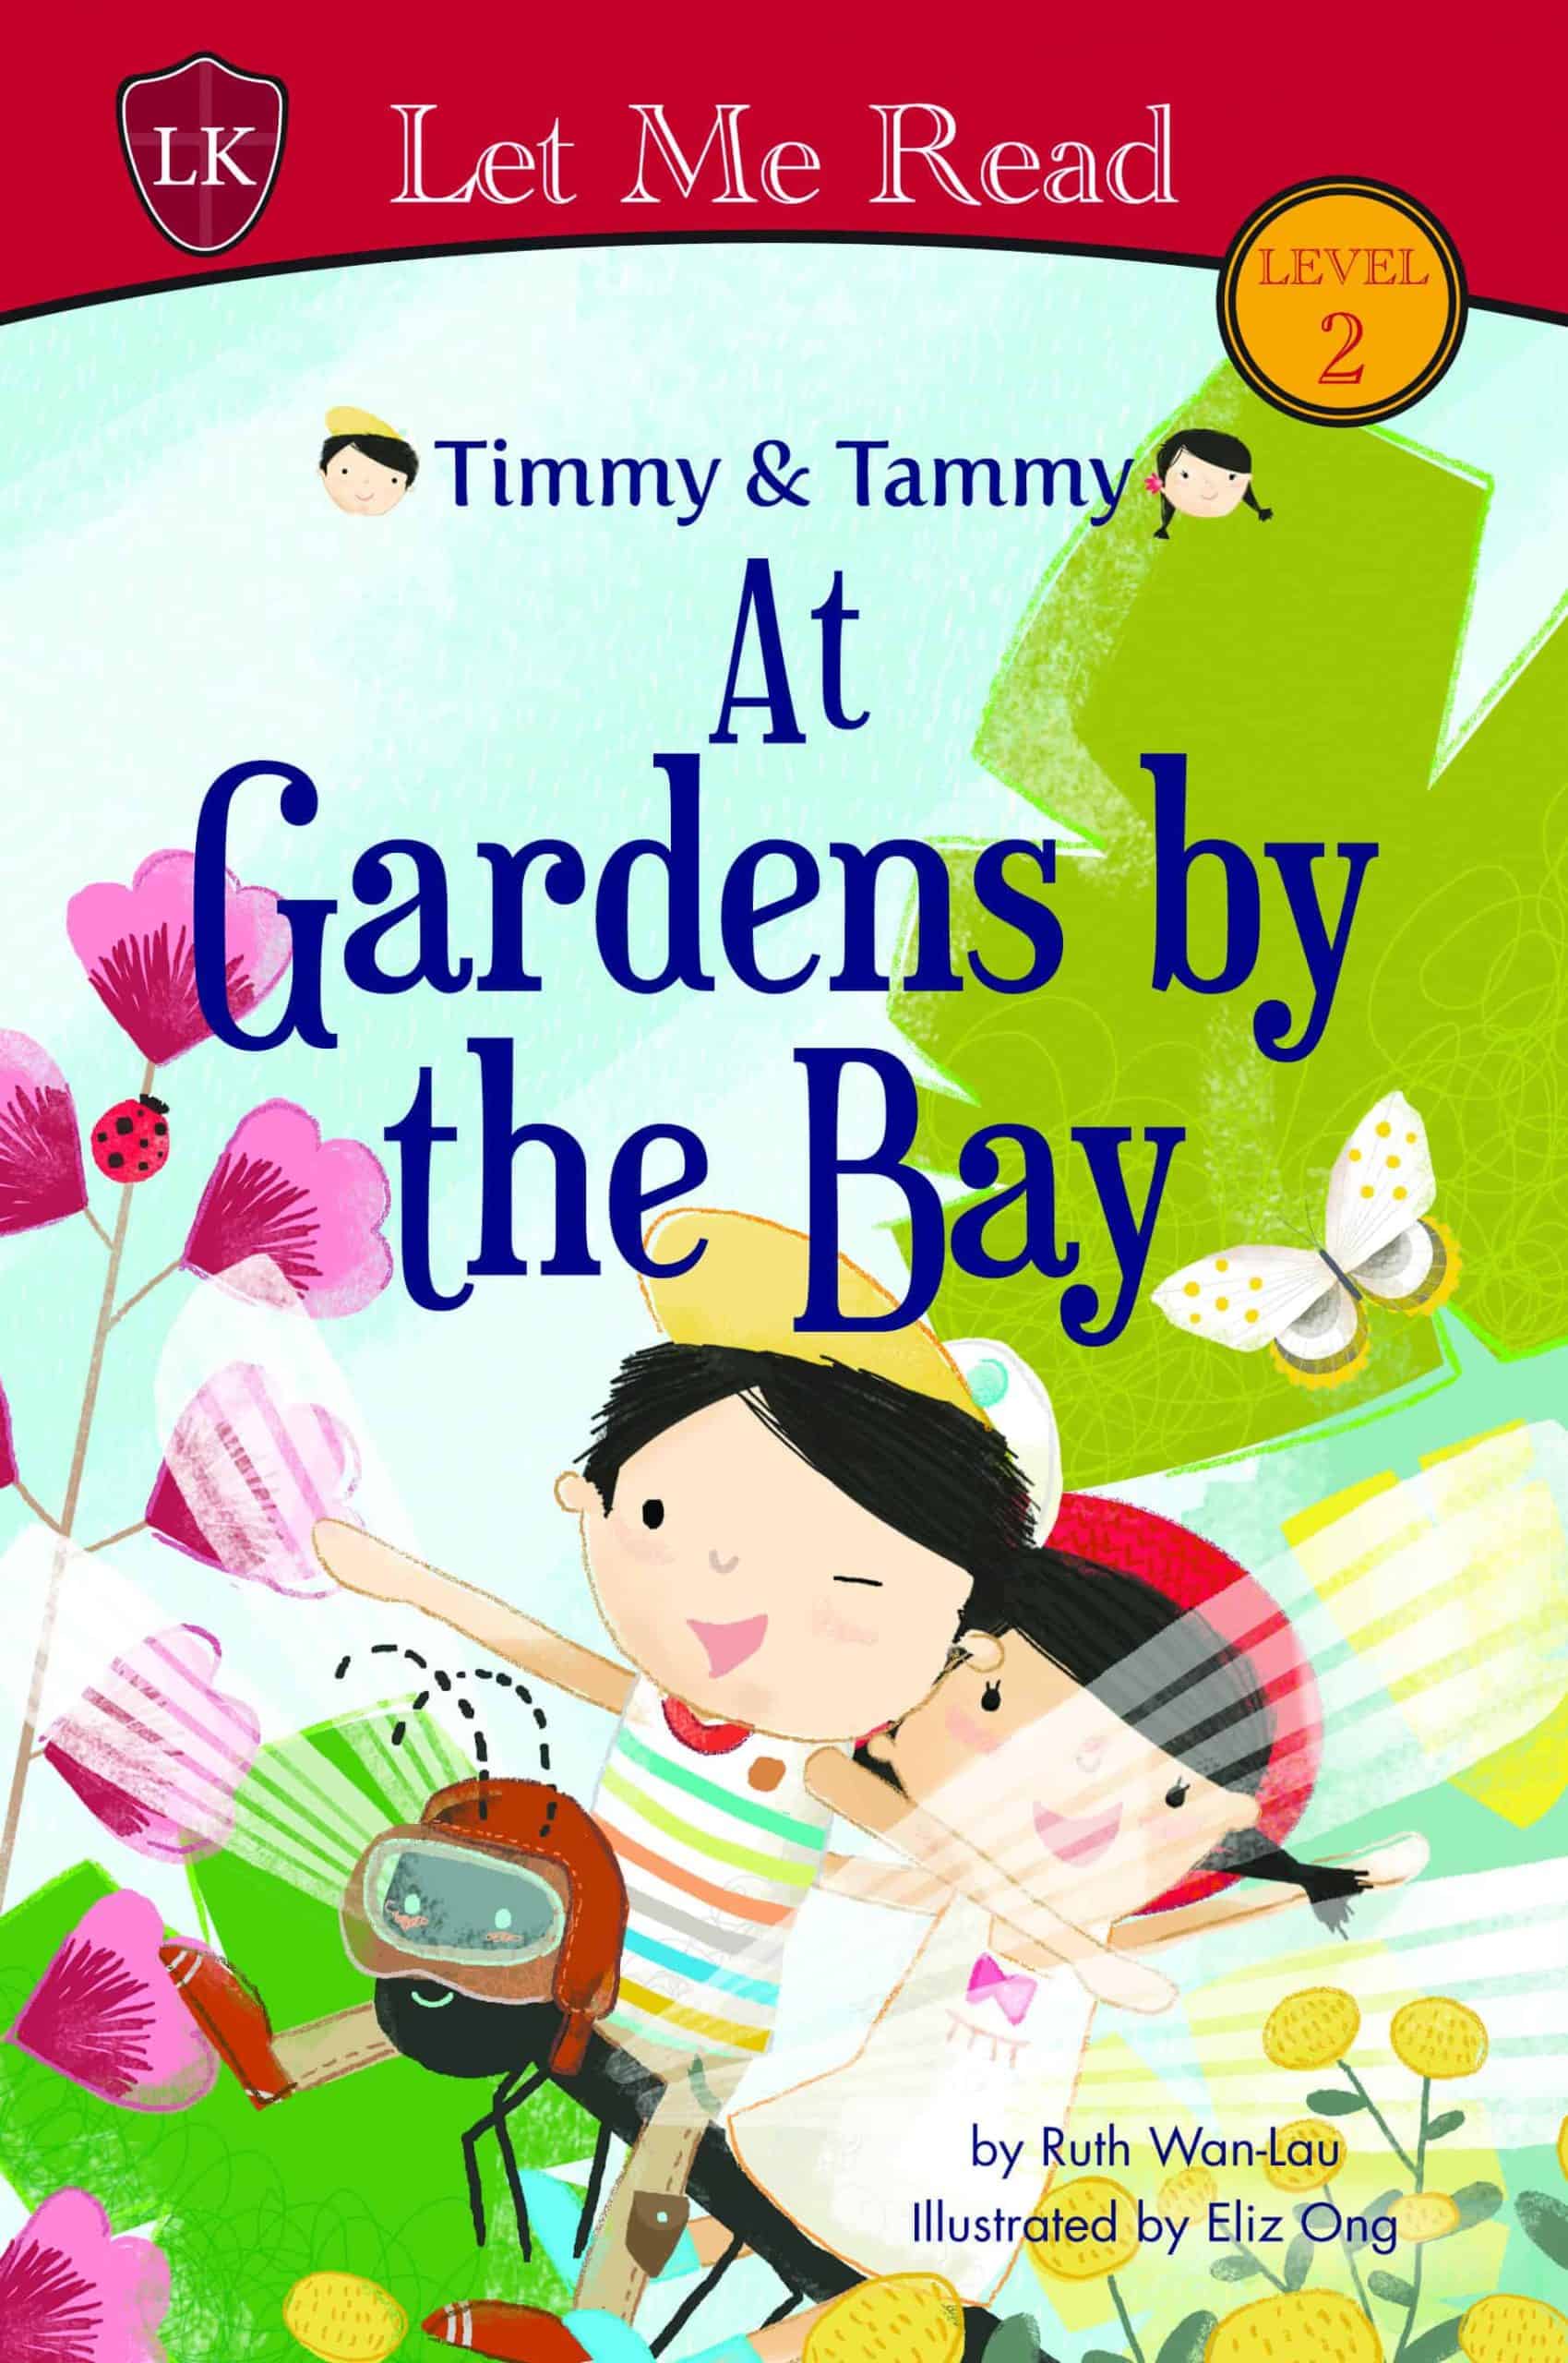 Timmy & Tammy (Level 2): At Gardens by the Bay